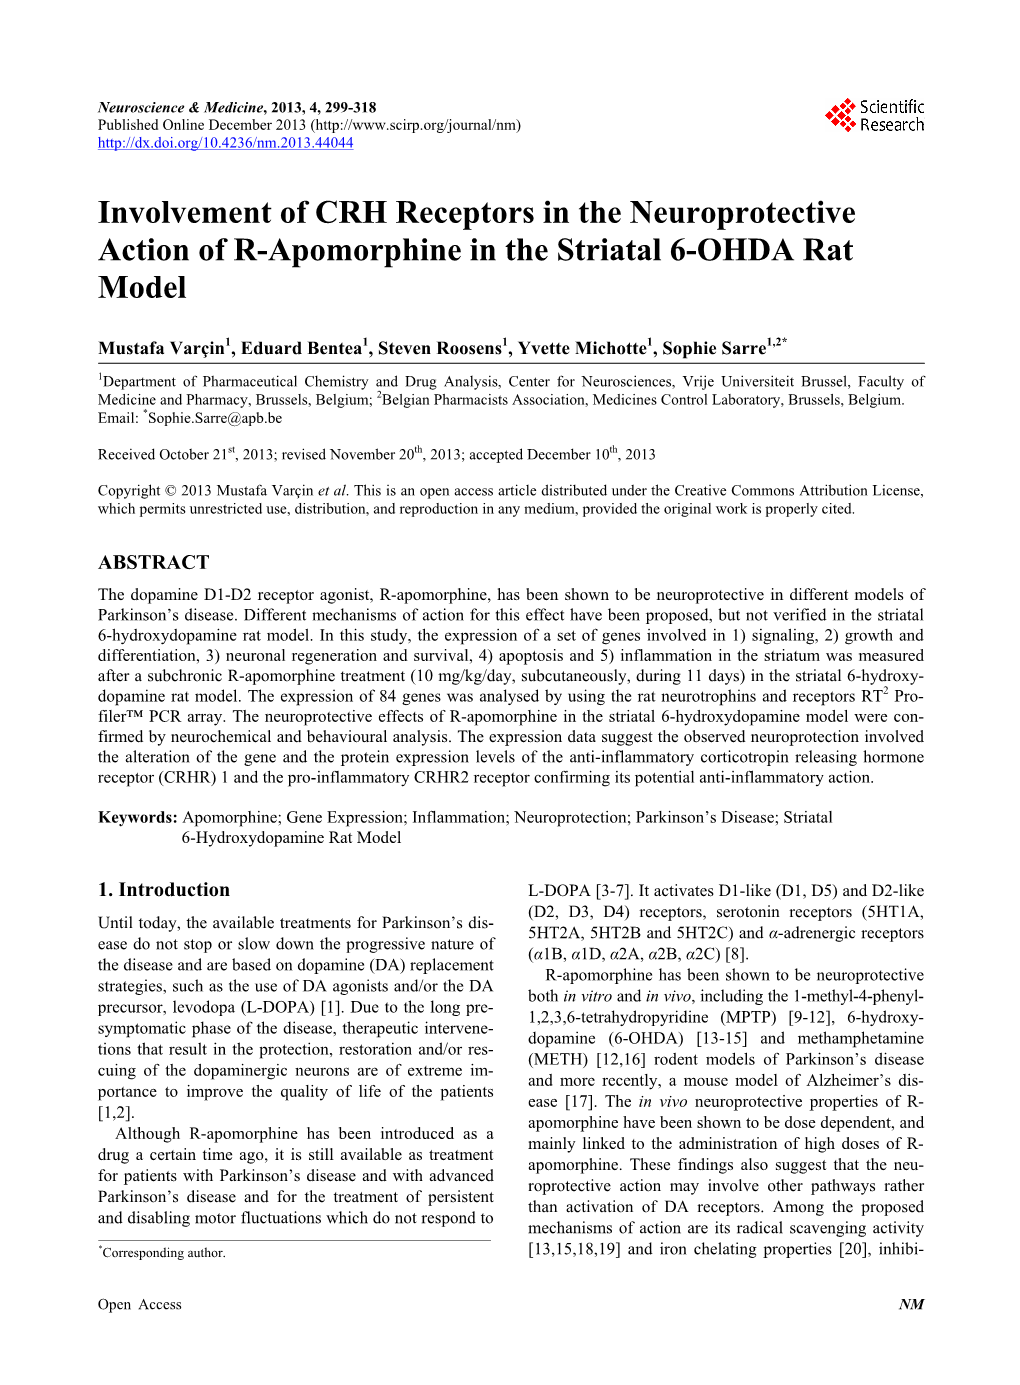 Involvement of CRH Receptors in the Neuroprotective Action of R-Apomorphine in the Striatal 6-OHDA Rat Model